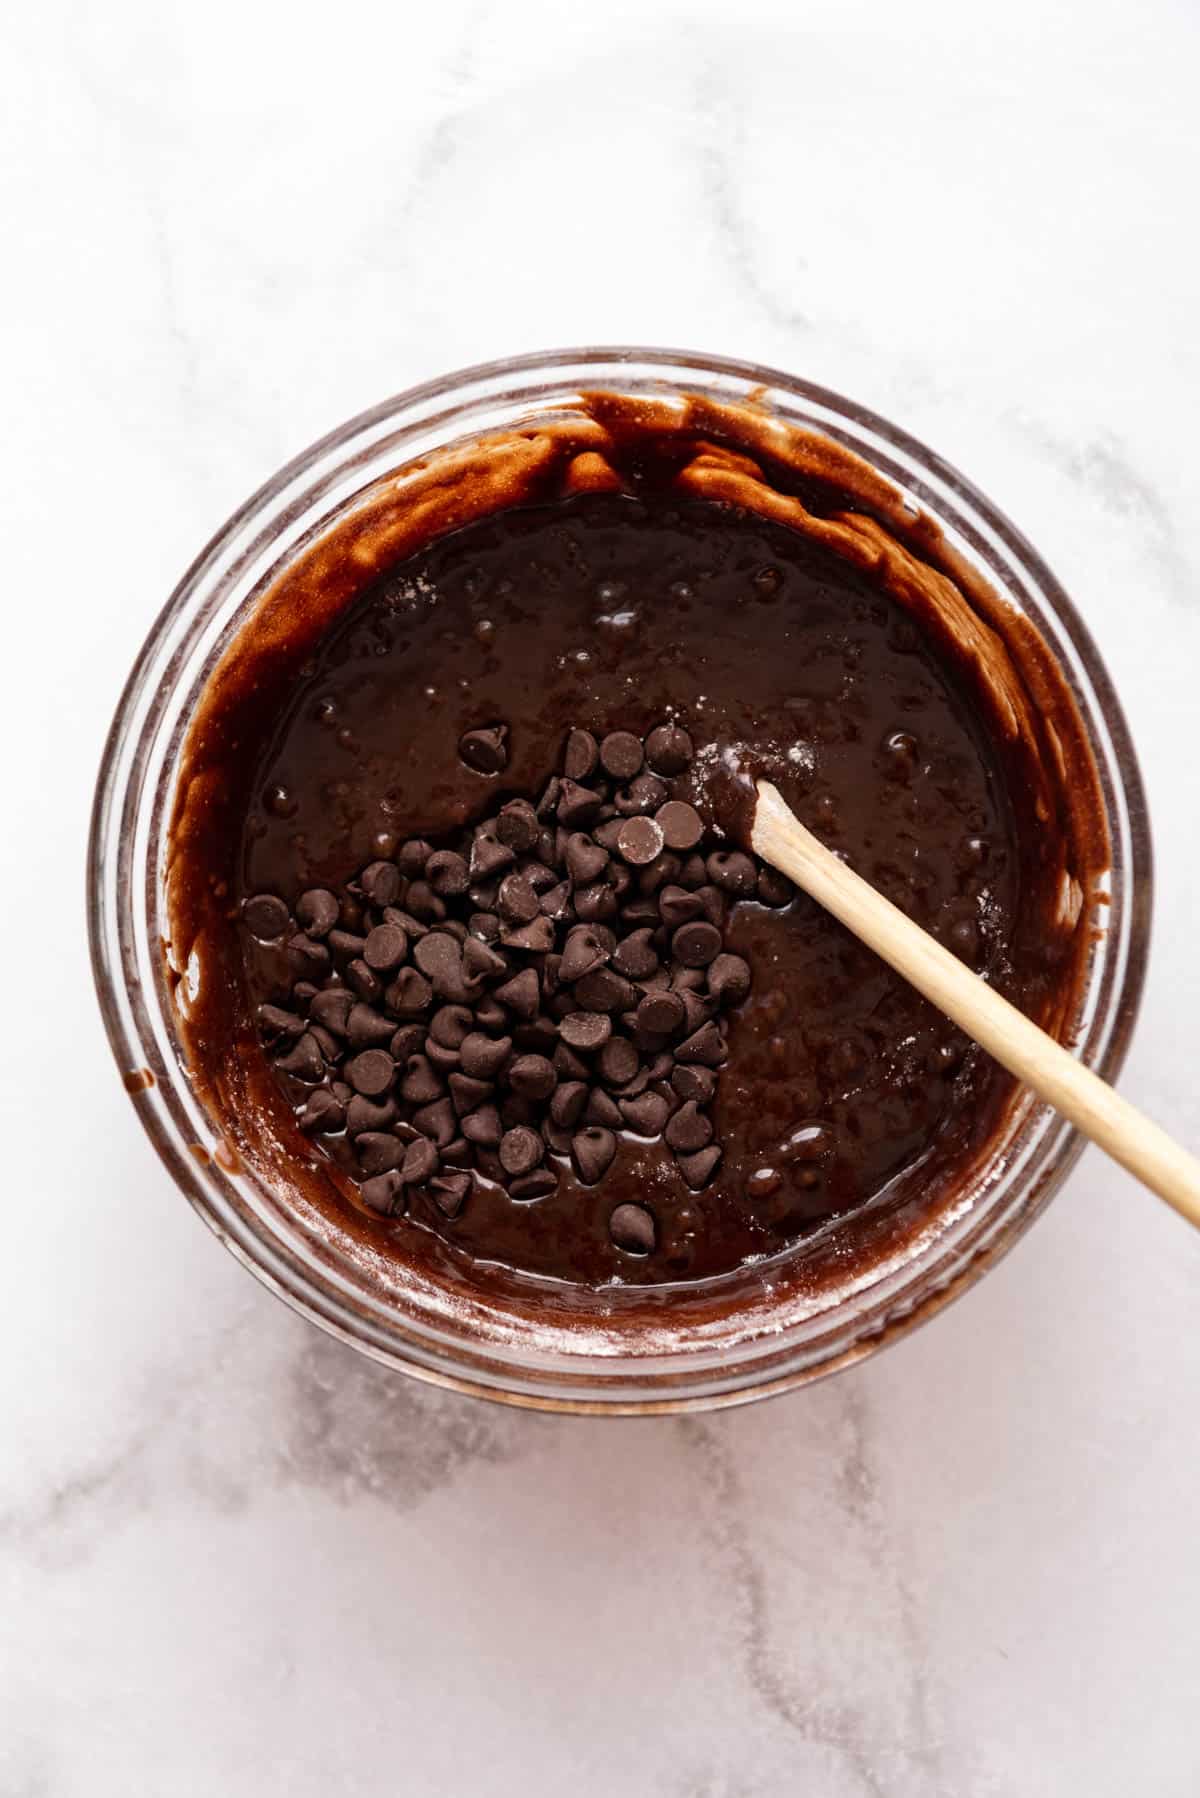 Adding chocolate chips to brownie batter in a glass bowl with a wooden spoon.